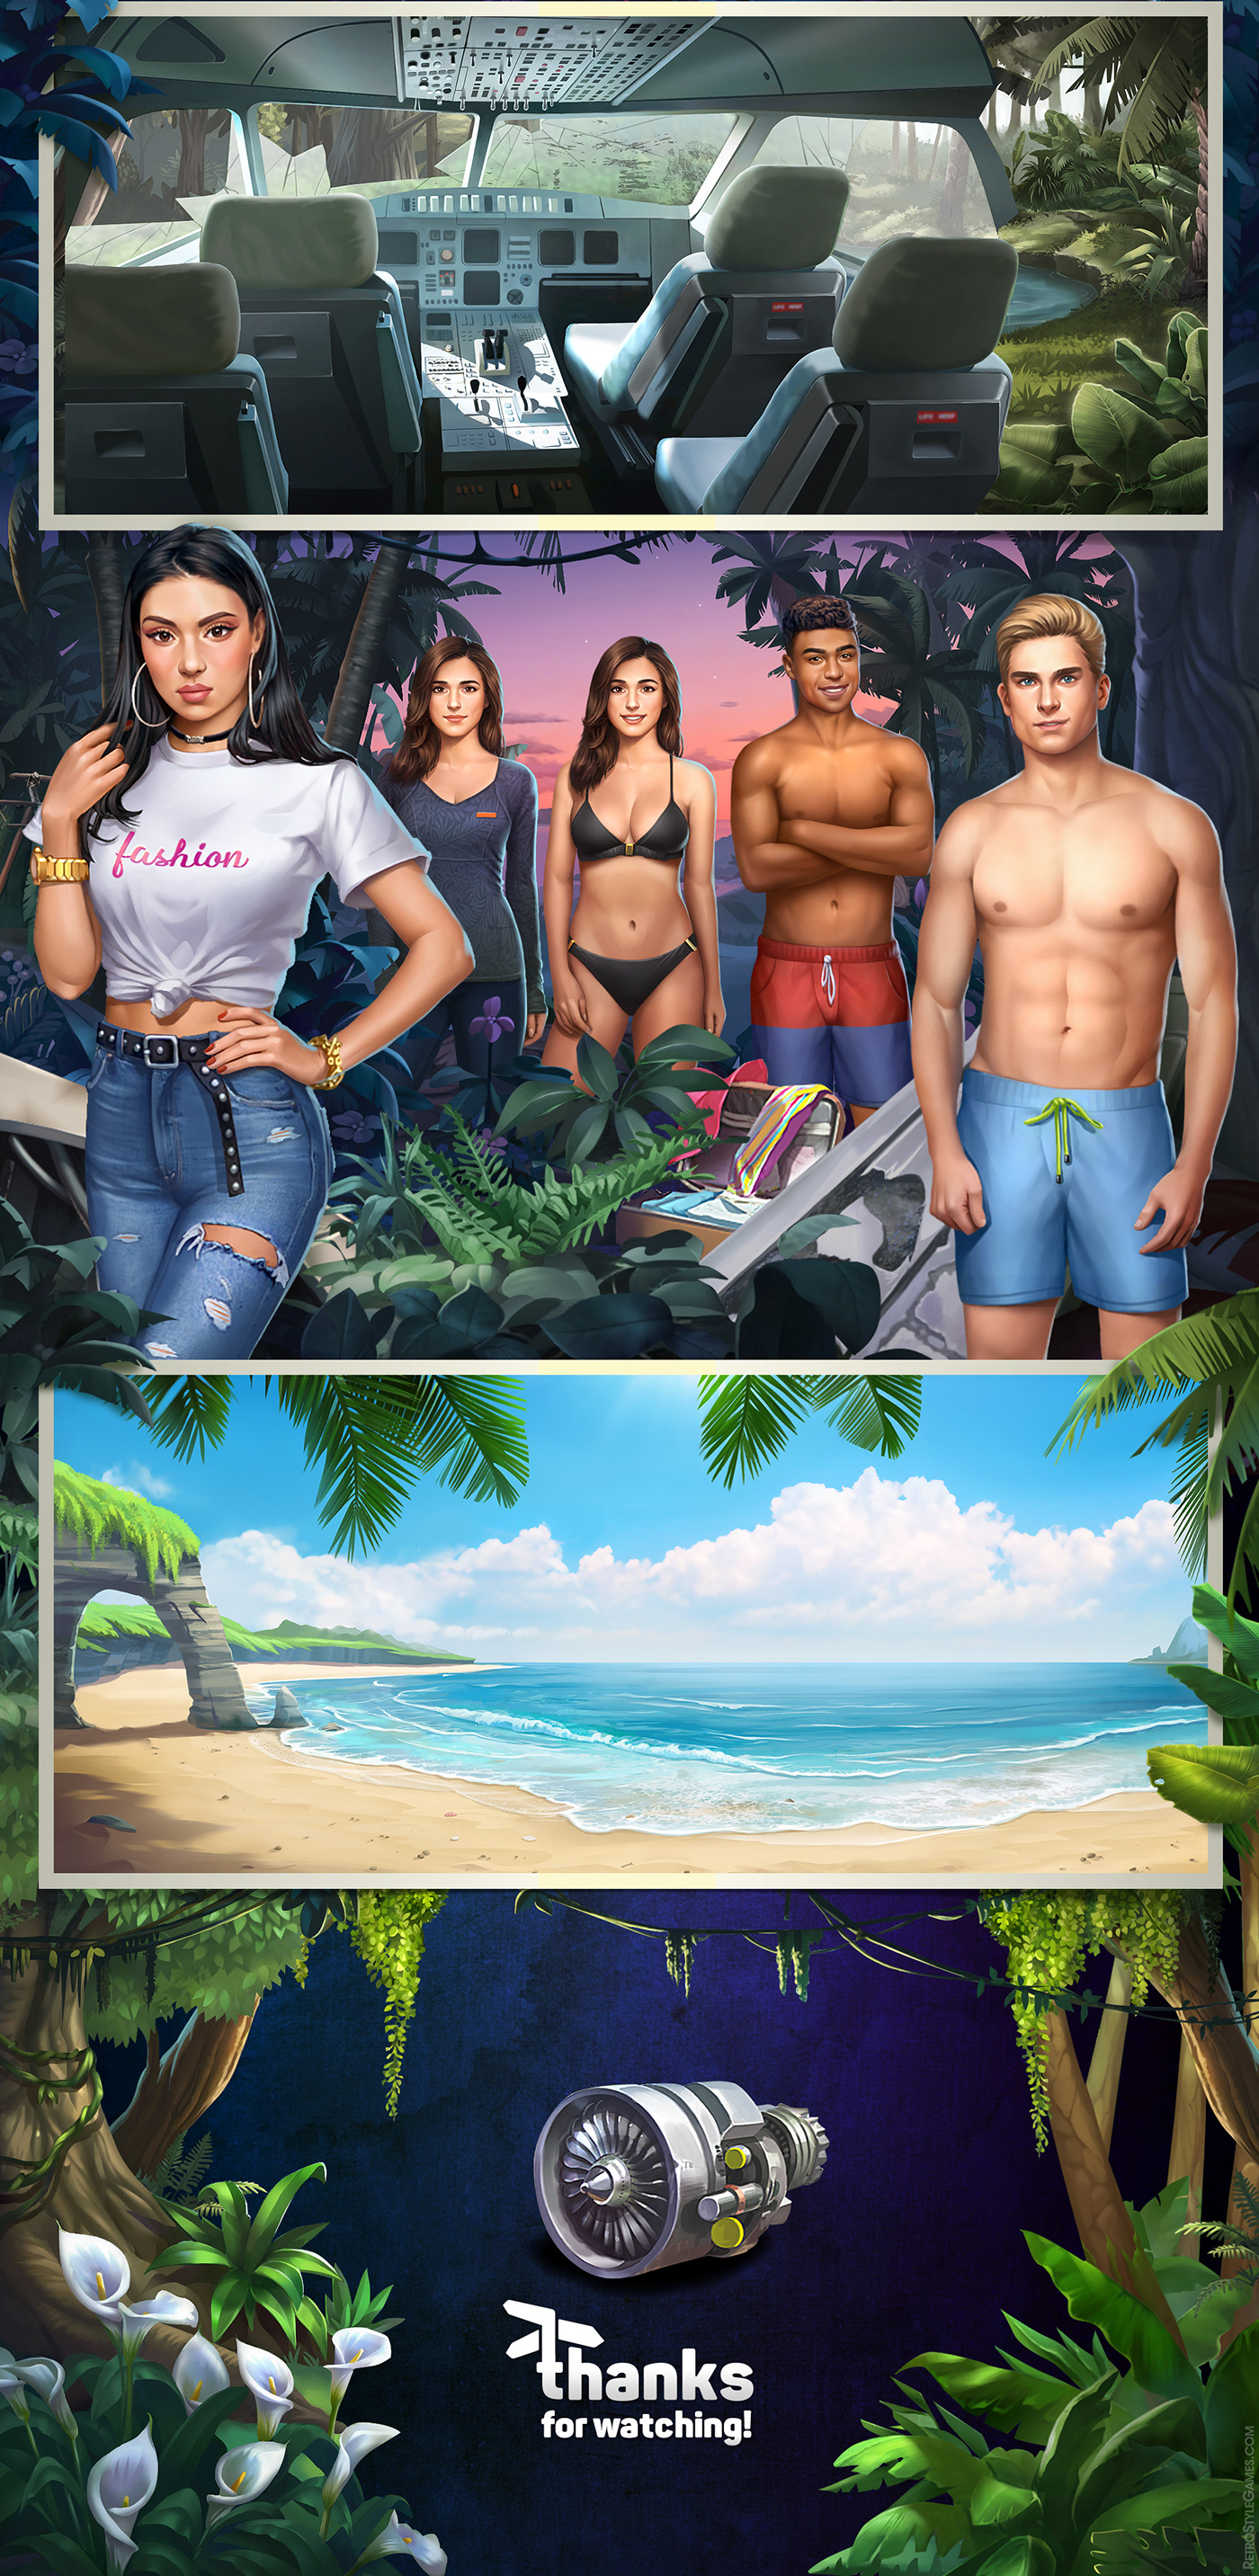 adventure backgrounds Chapters characters choices escape girls illustrations moments romance